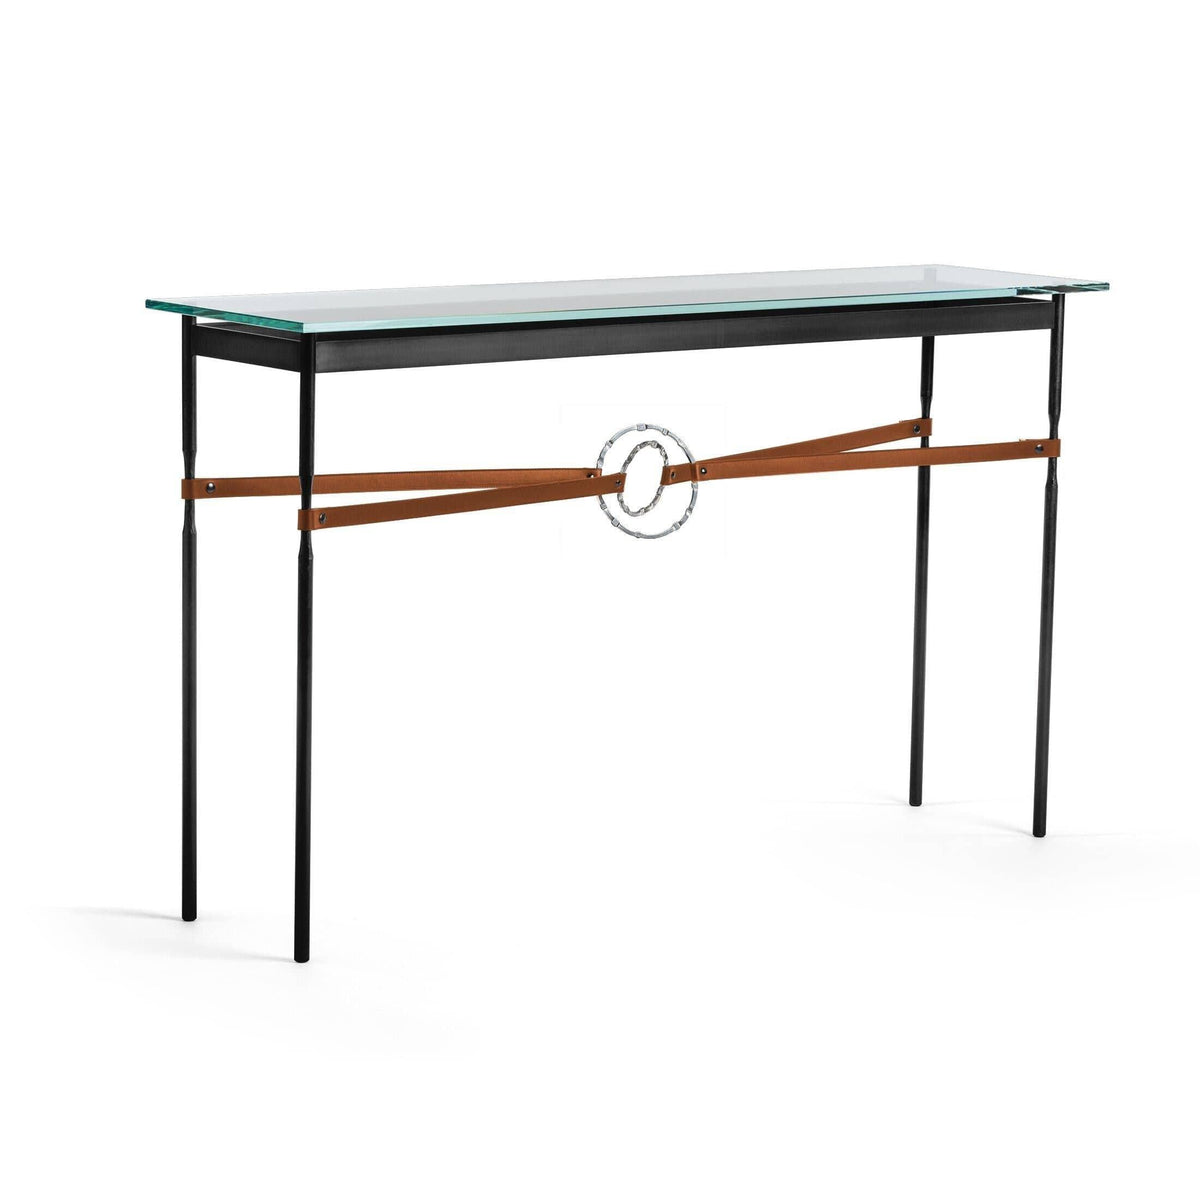 Hubbardton Forge - Equus Chestnut Leather Console Table - 750118-10-85-LC-VA0714 | Montreal Lighting & Hardware